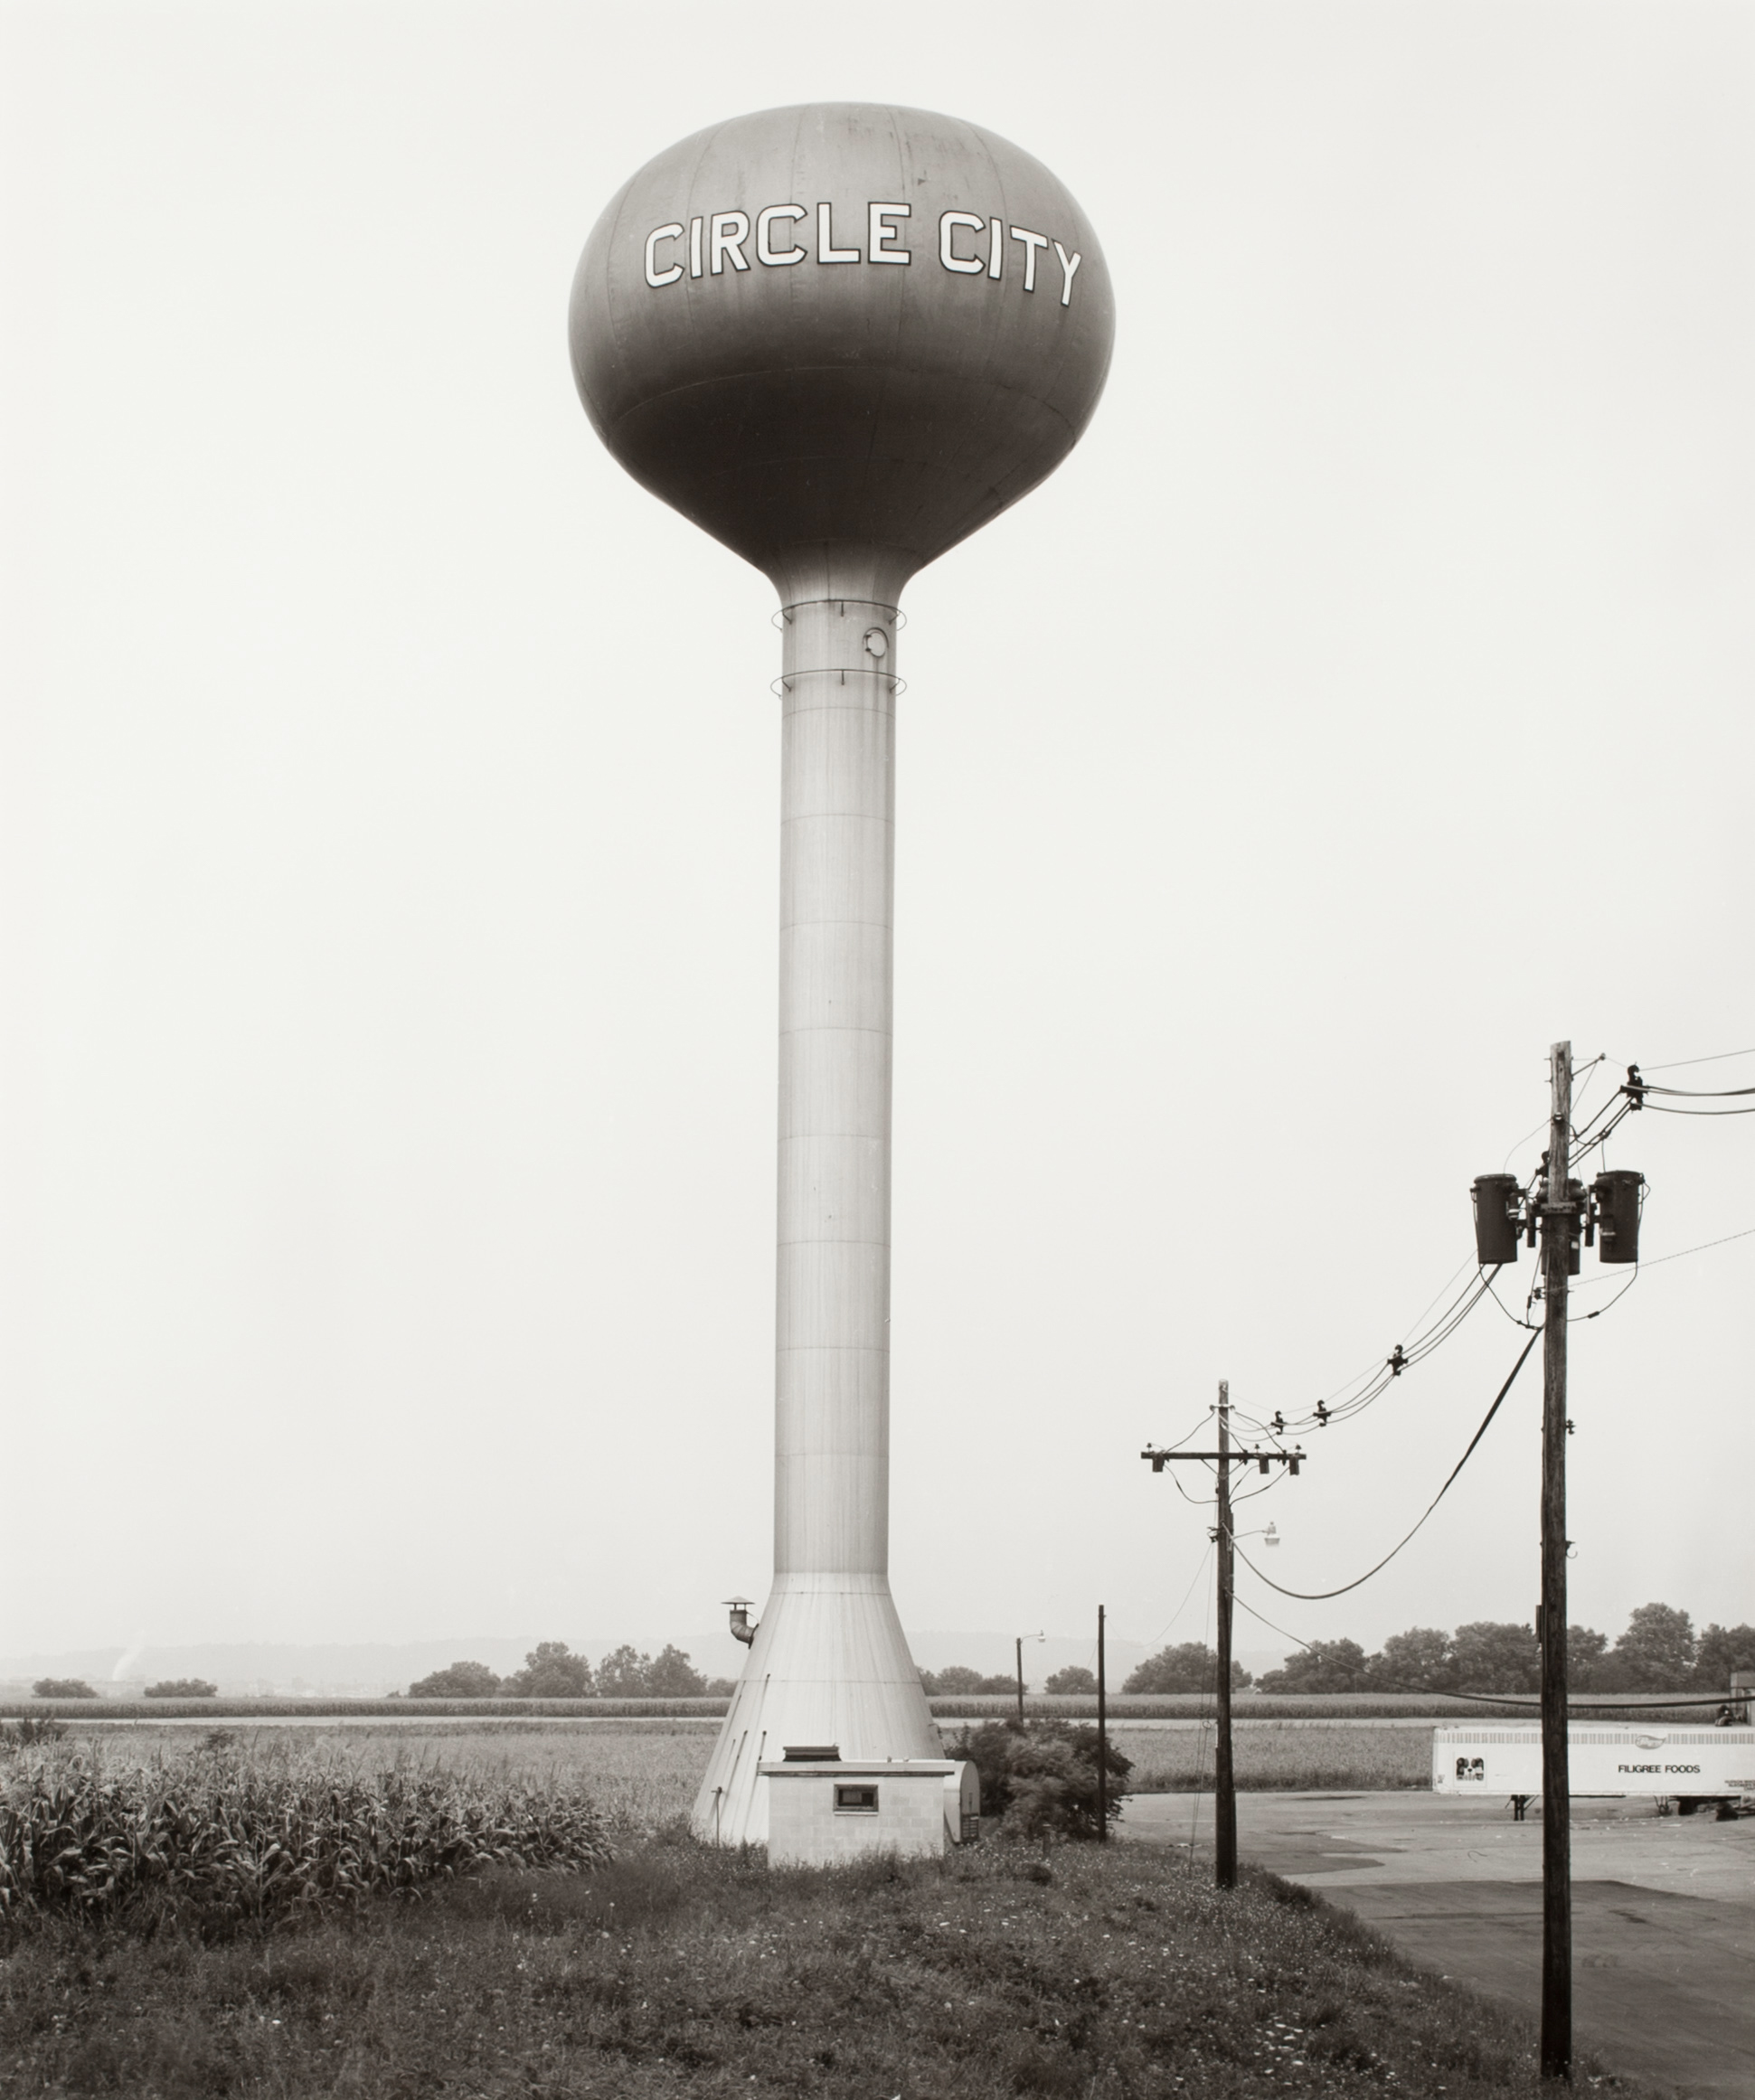 Black and white photograph of a water tower in a grass field near electrical power lines